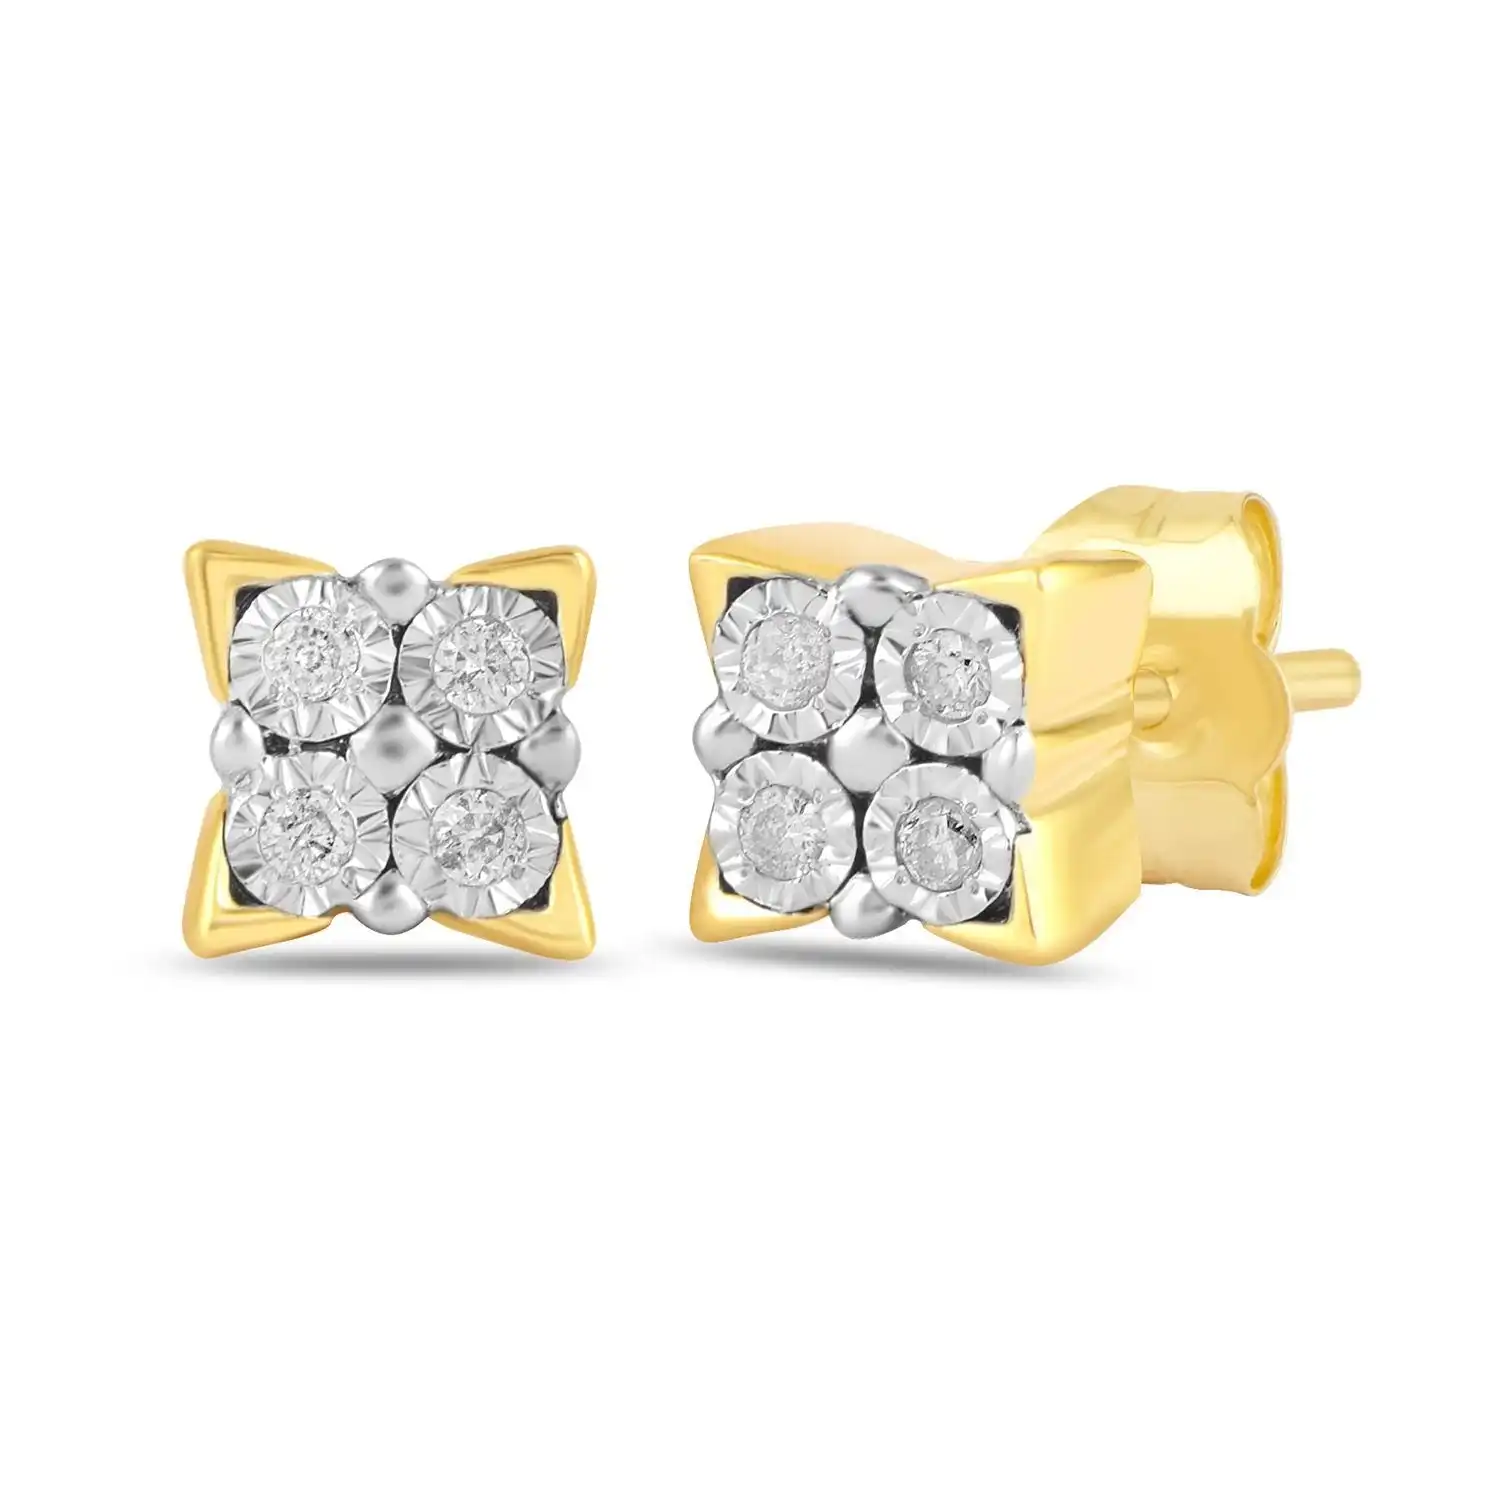 Diamond Miracle Square Look Earrings in 9ct Yellow Gold